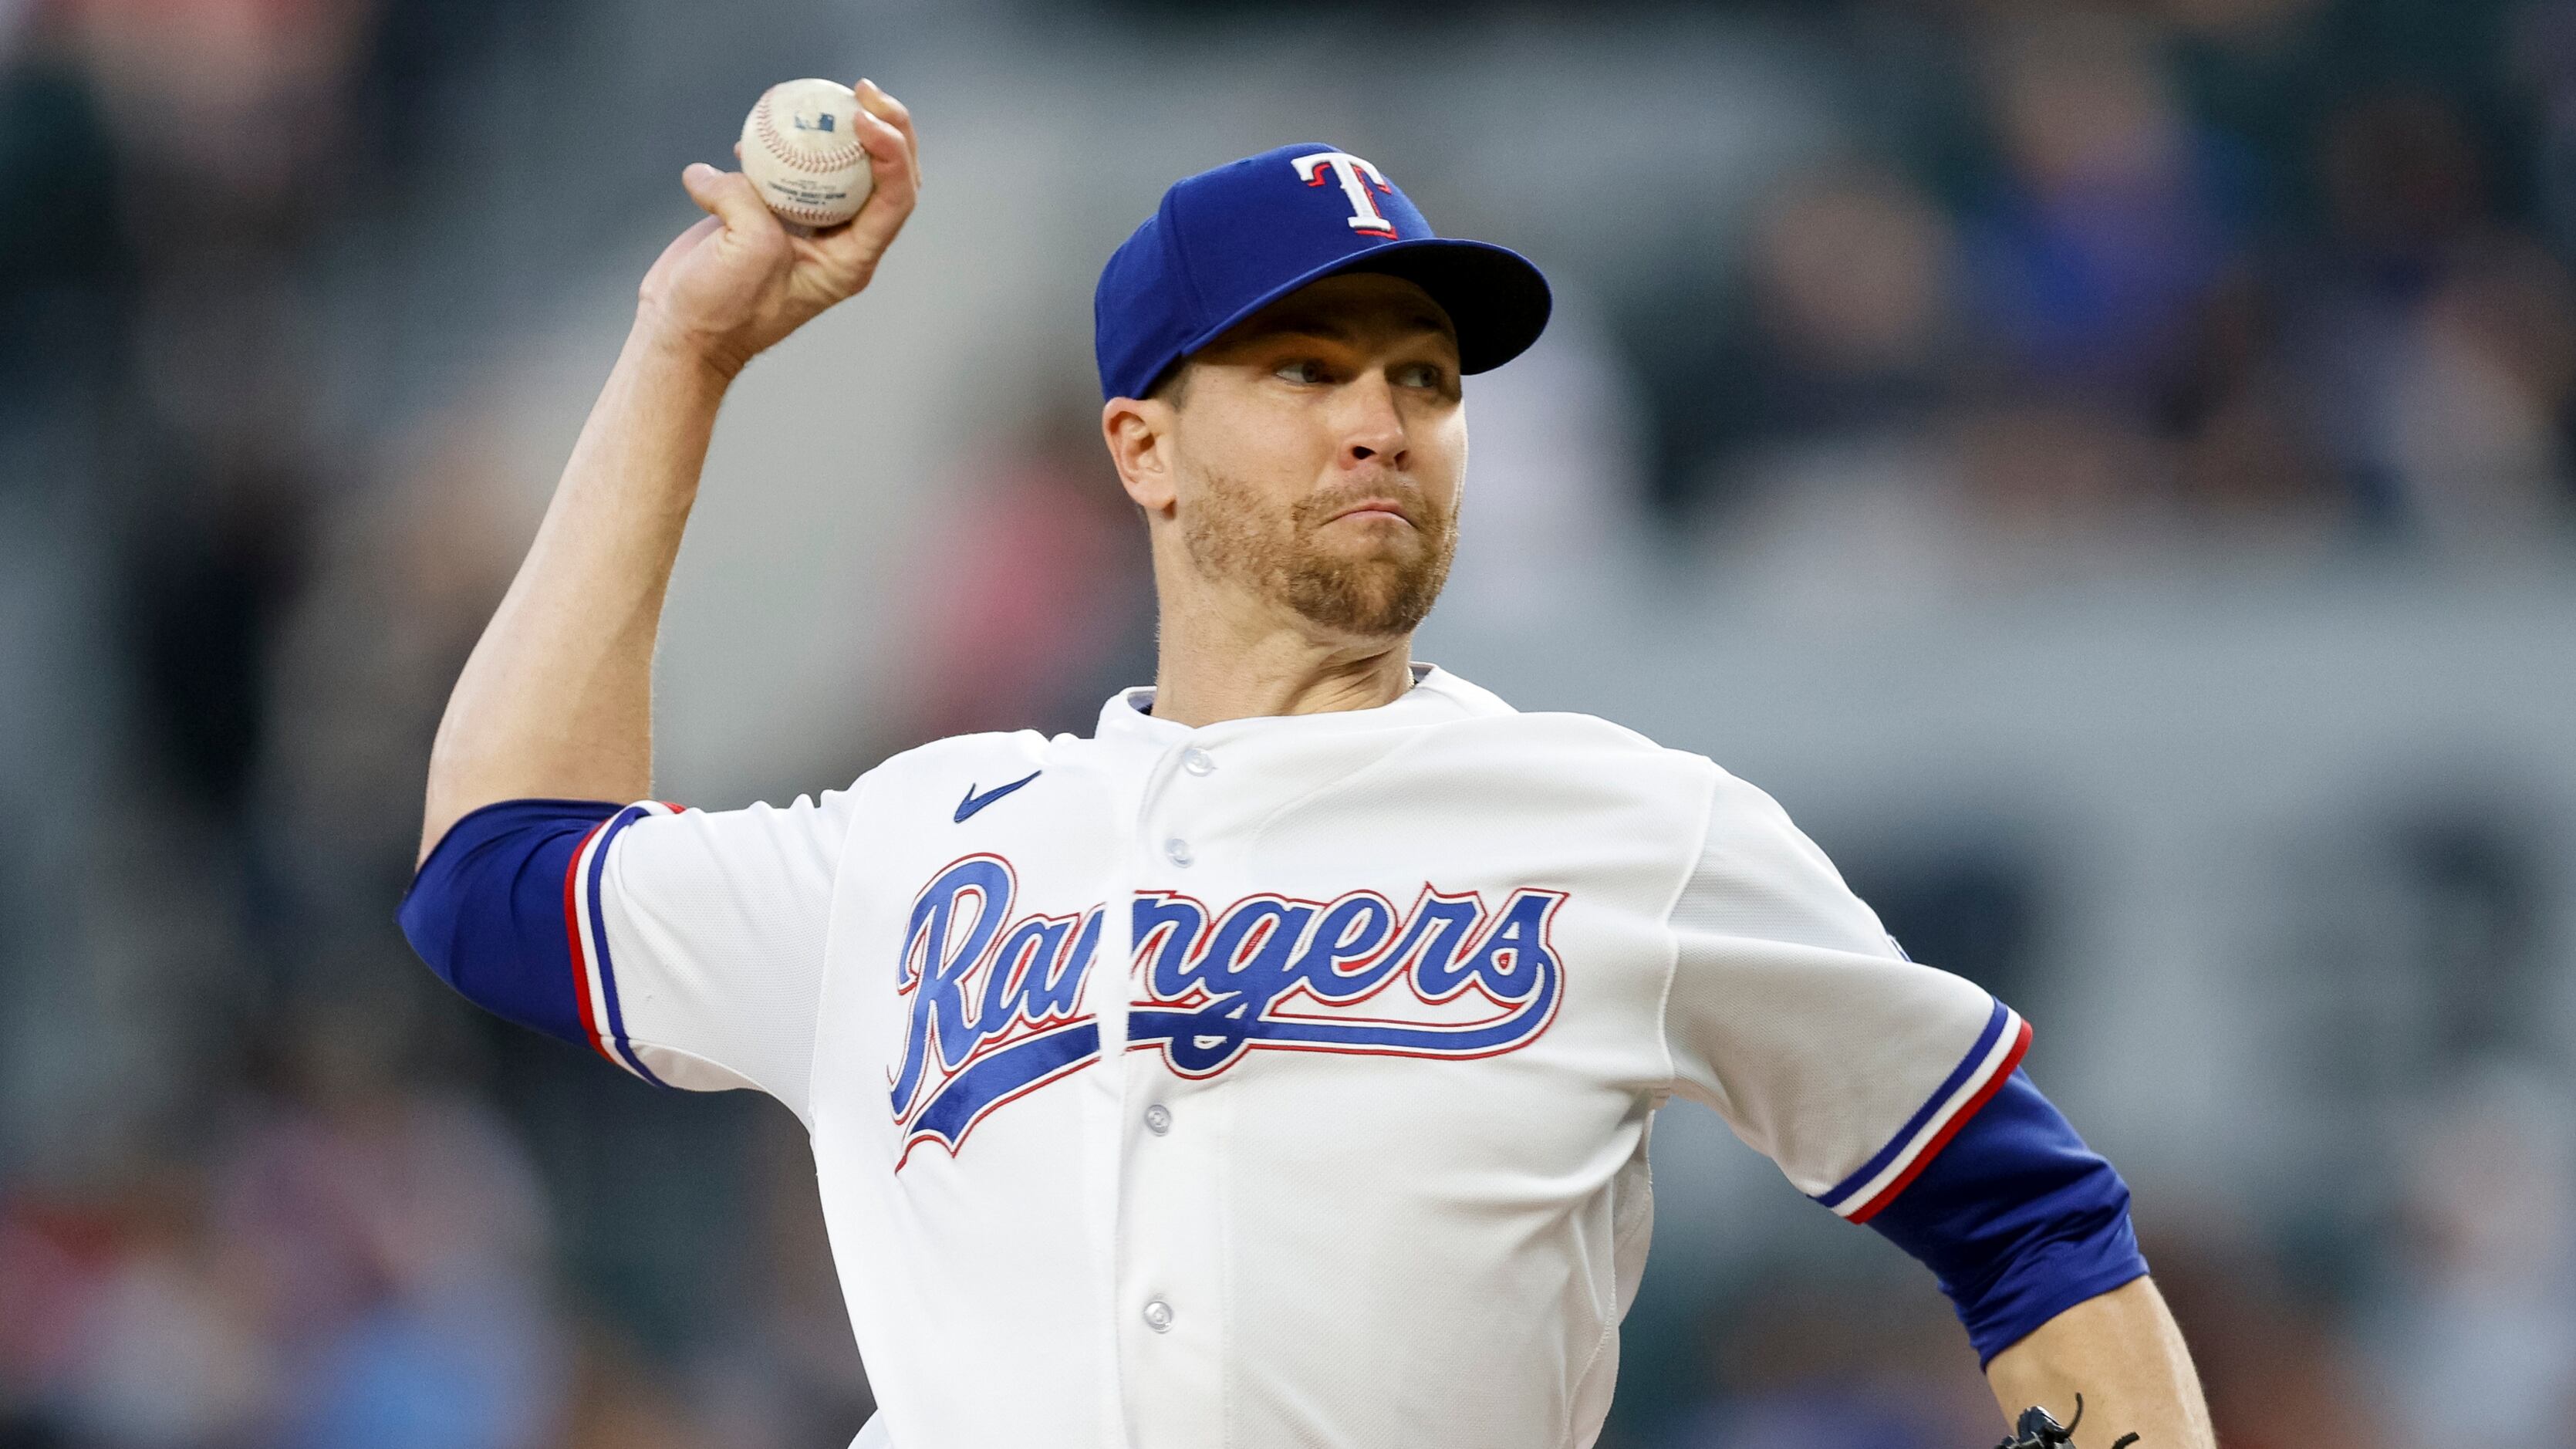 Rangers pitcher Jacob deGrom leaving team to attend birth of third